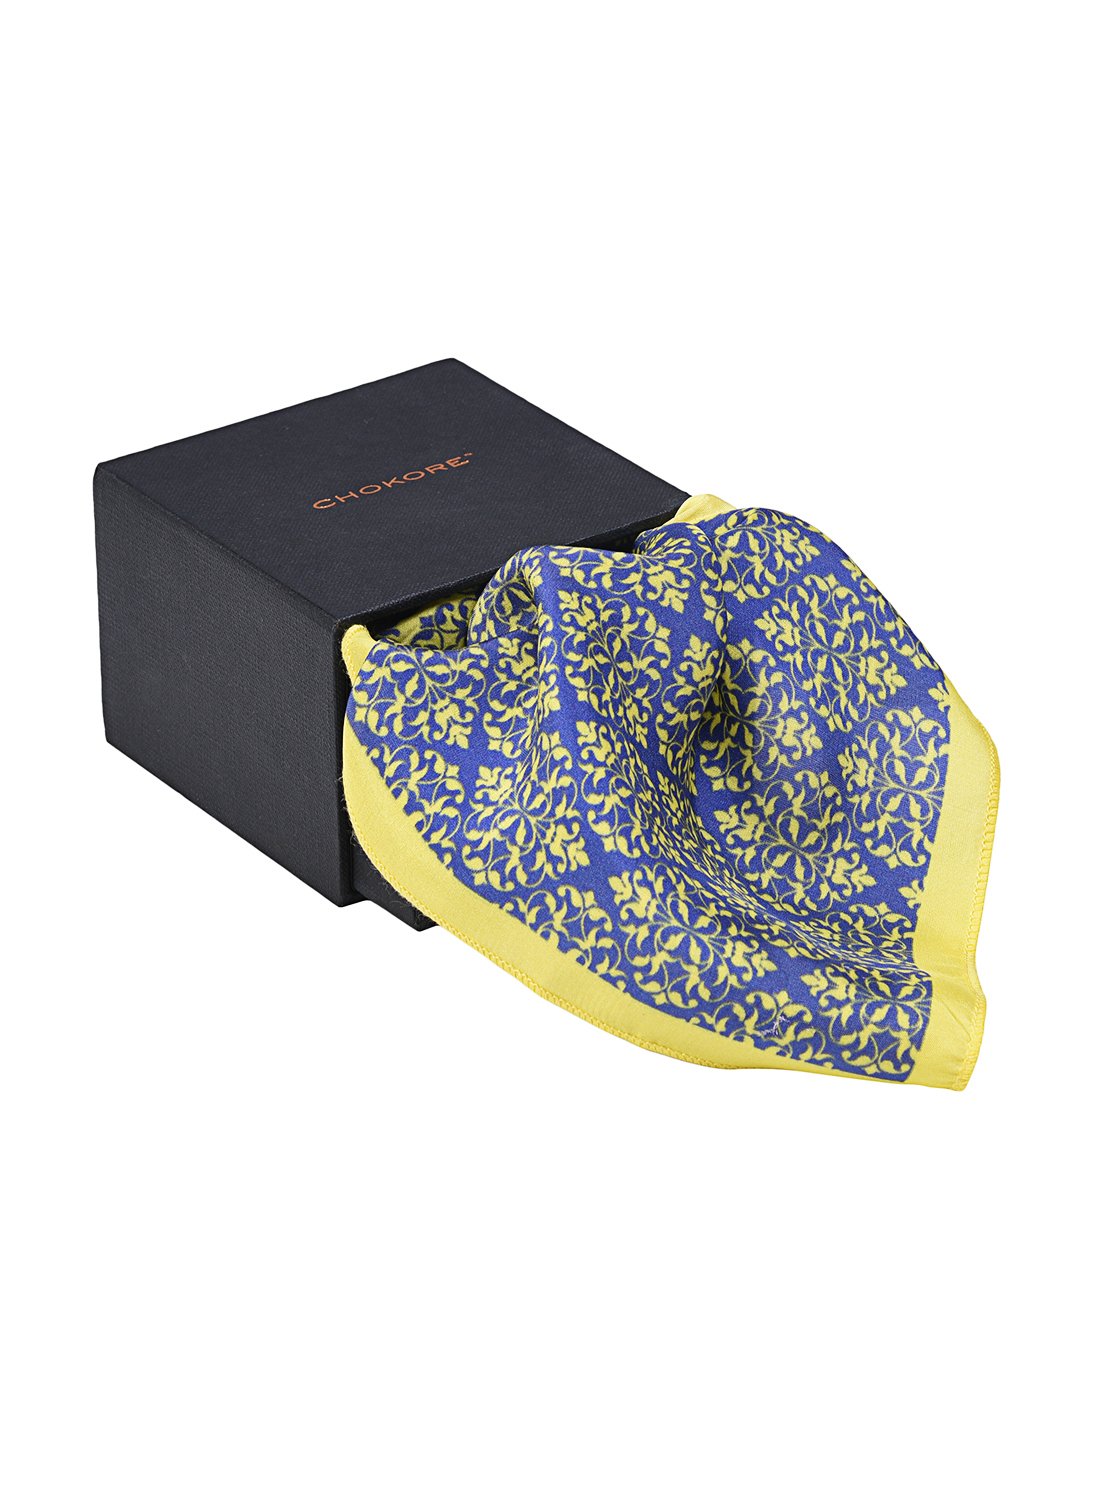 Chokore Yellow and Blue Silk Pocket Squares from Indian at Heart collection